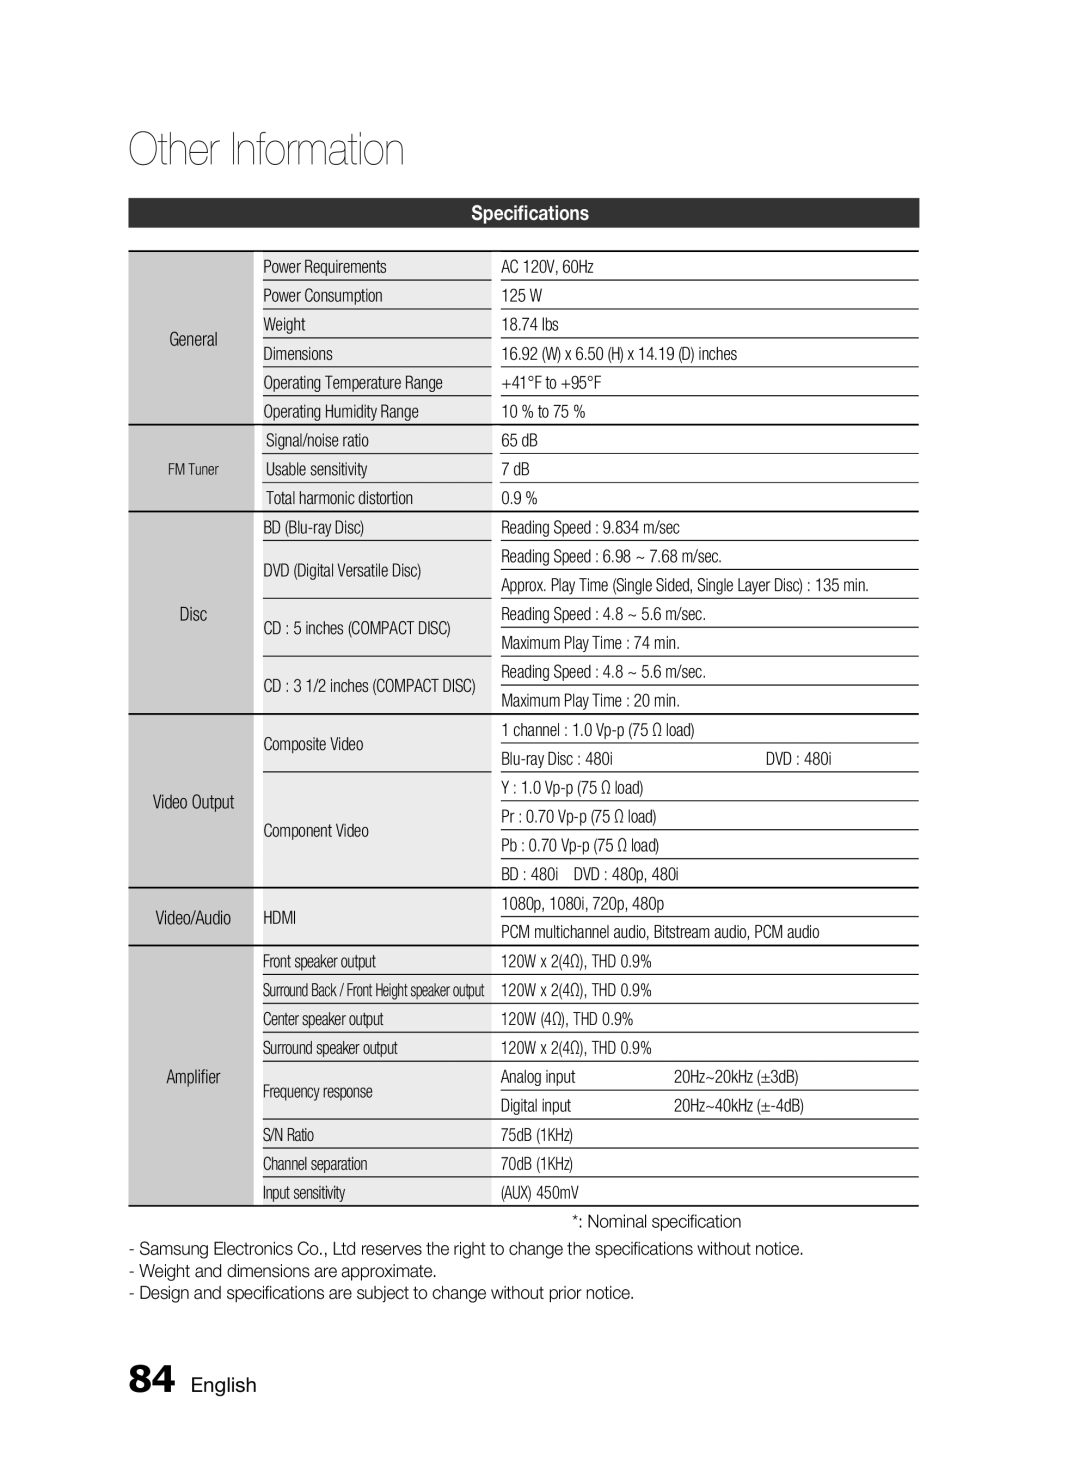 Samsung HW-D7000 user manual Speciﬁcations, English 